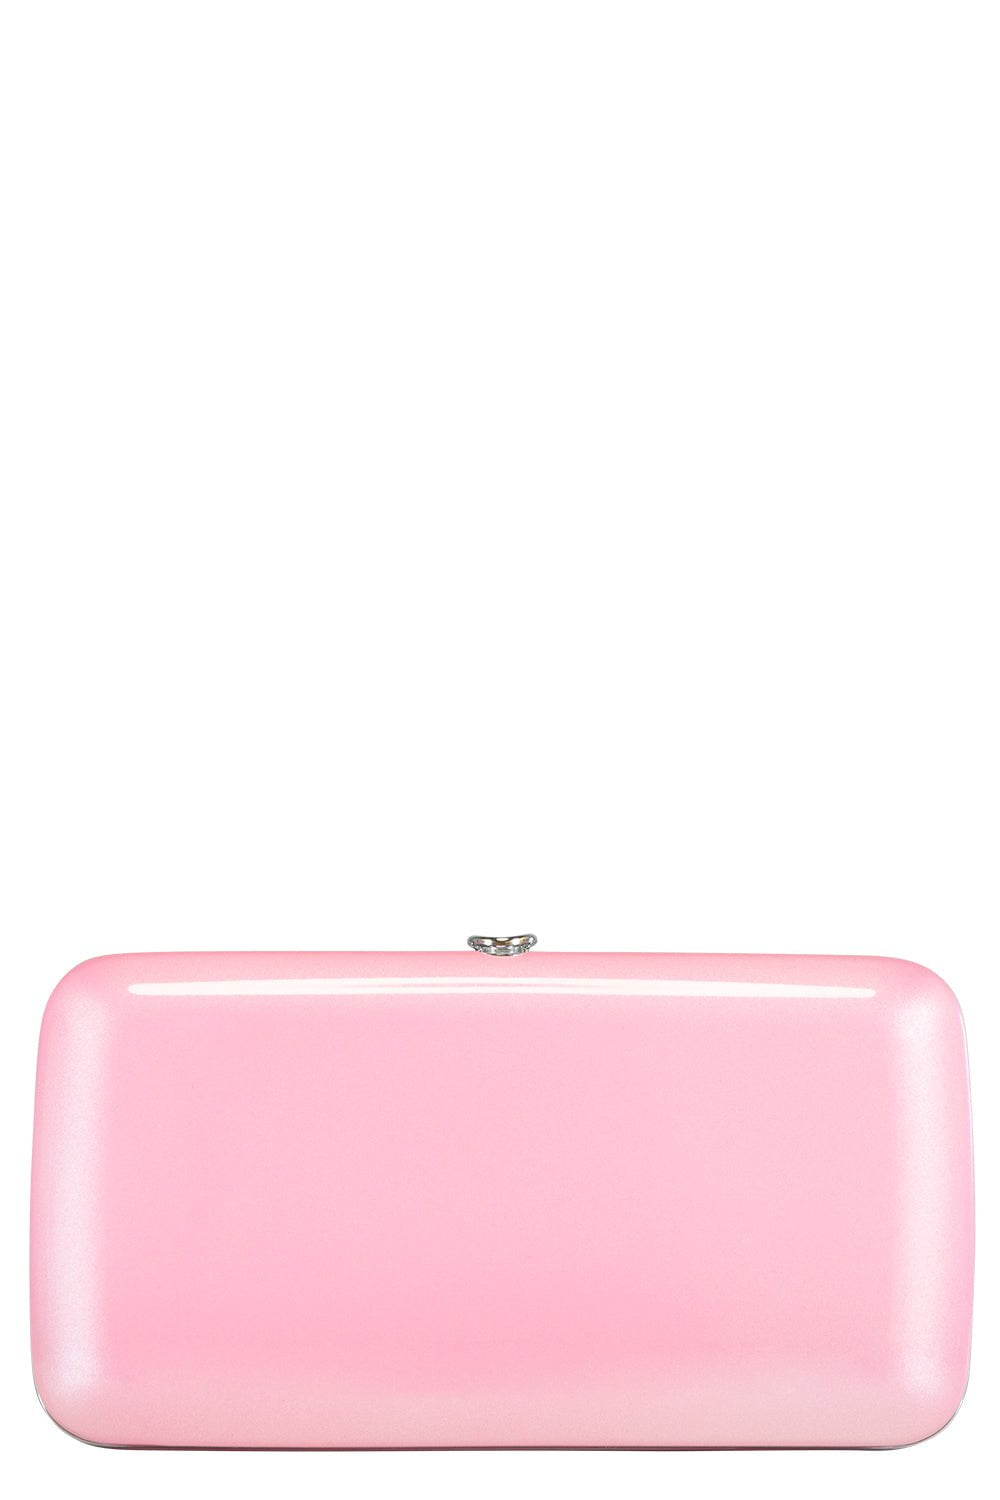 JEFFREY LEVINSON-Finley Clutch - Pearl Pink-PEARL PINK